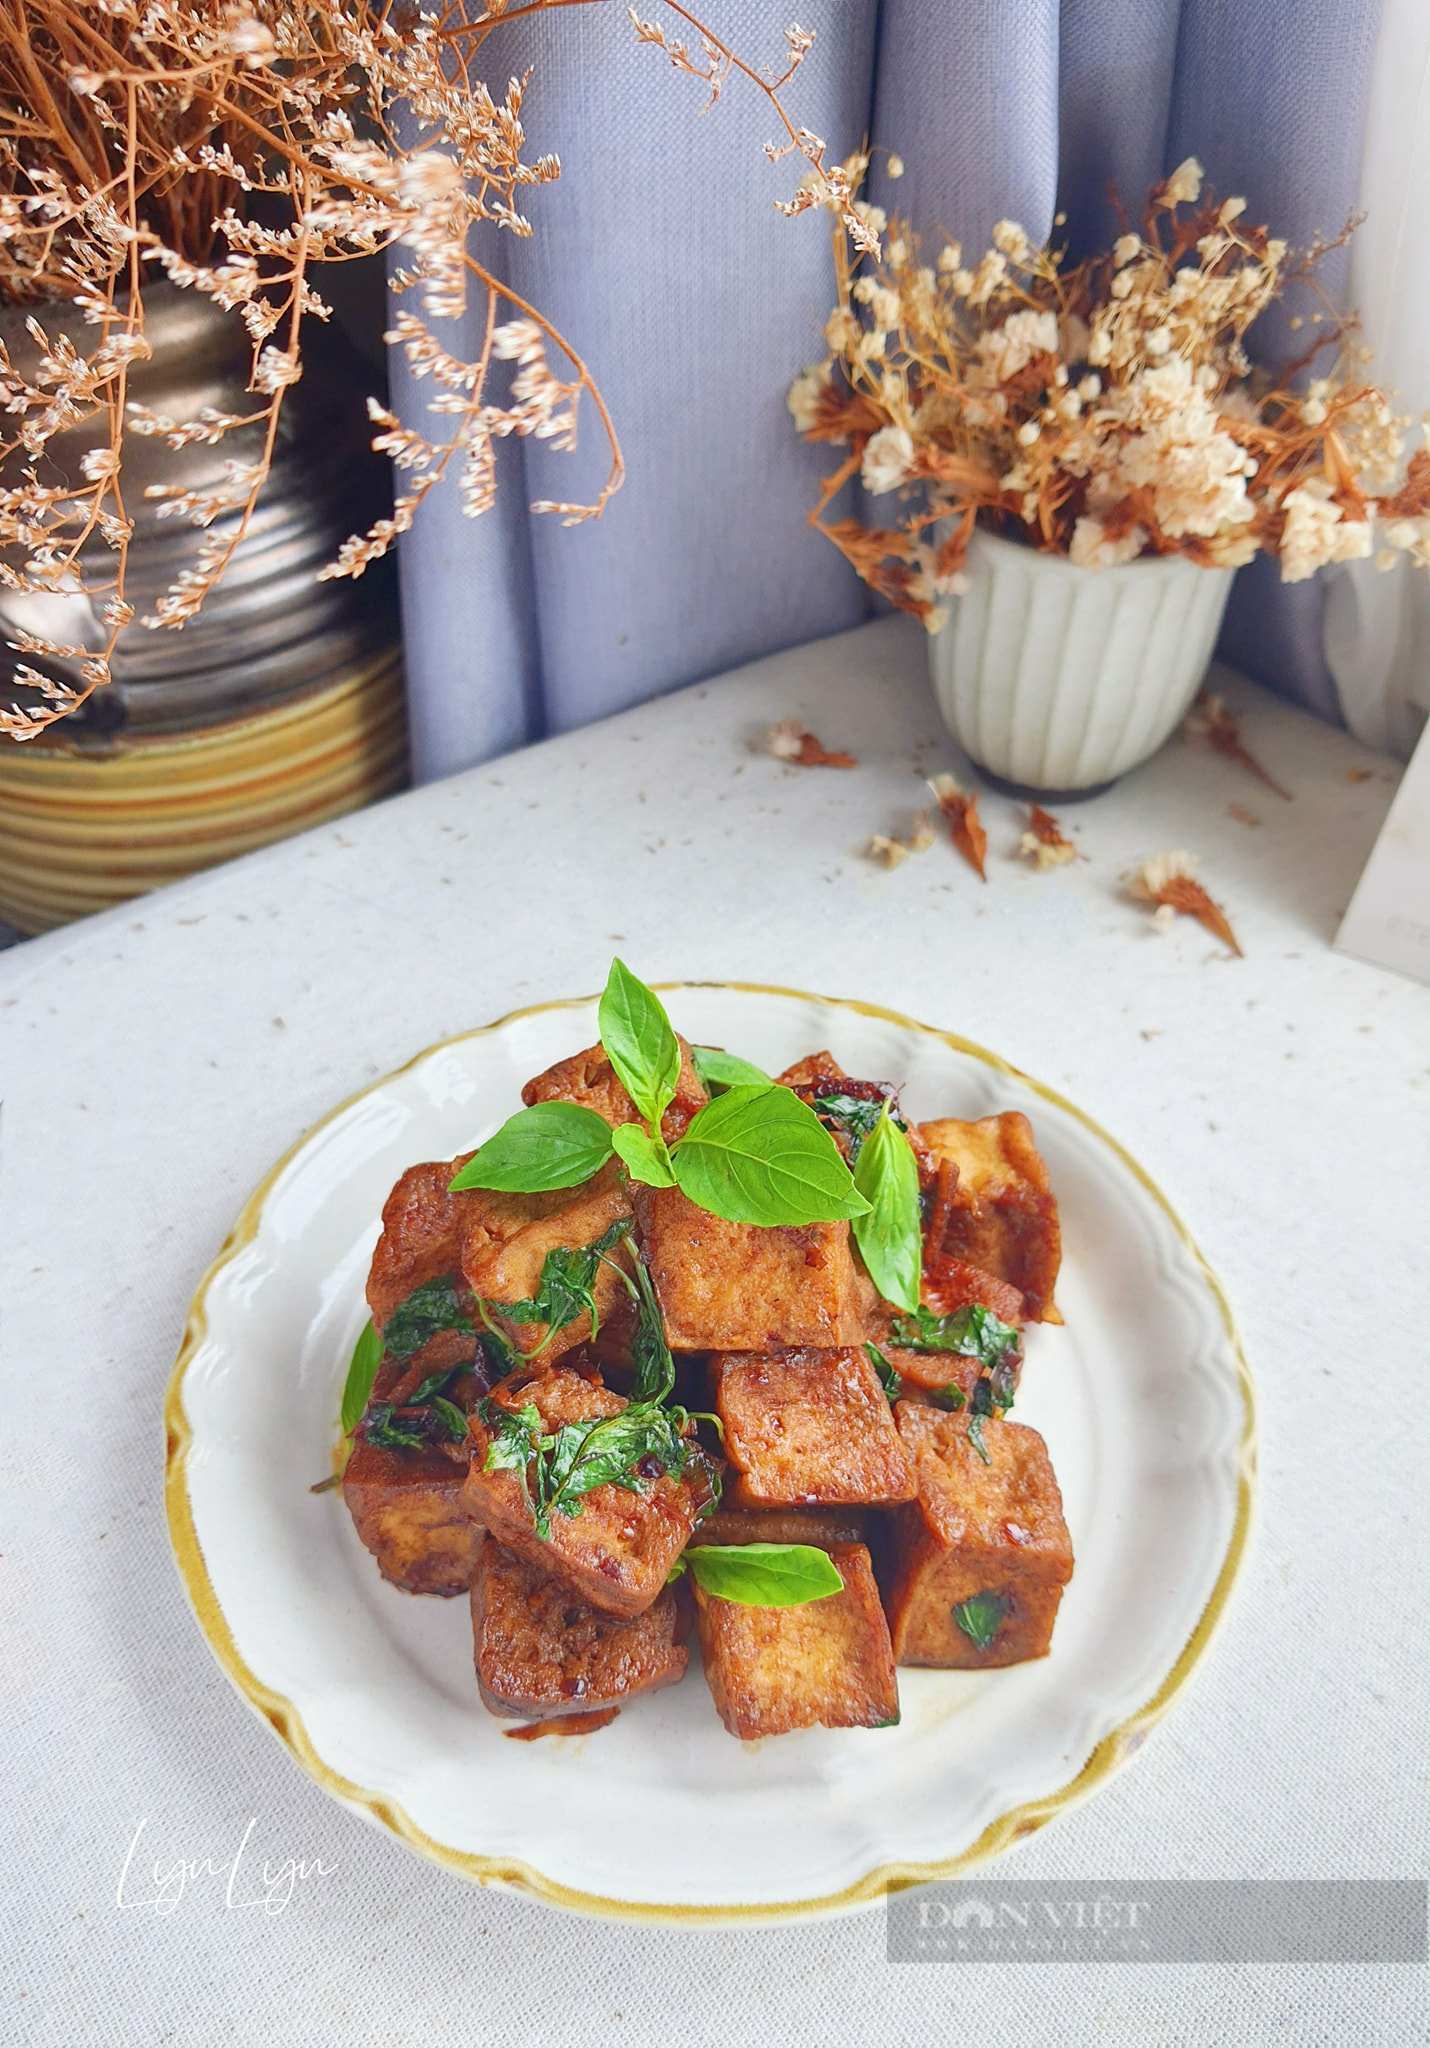 Tofu combined with this leaf will create an extremely attractive dish - Photo 3.